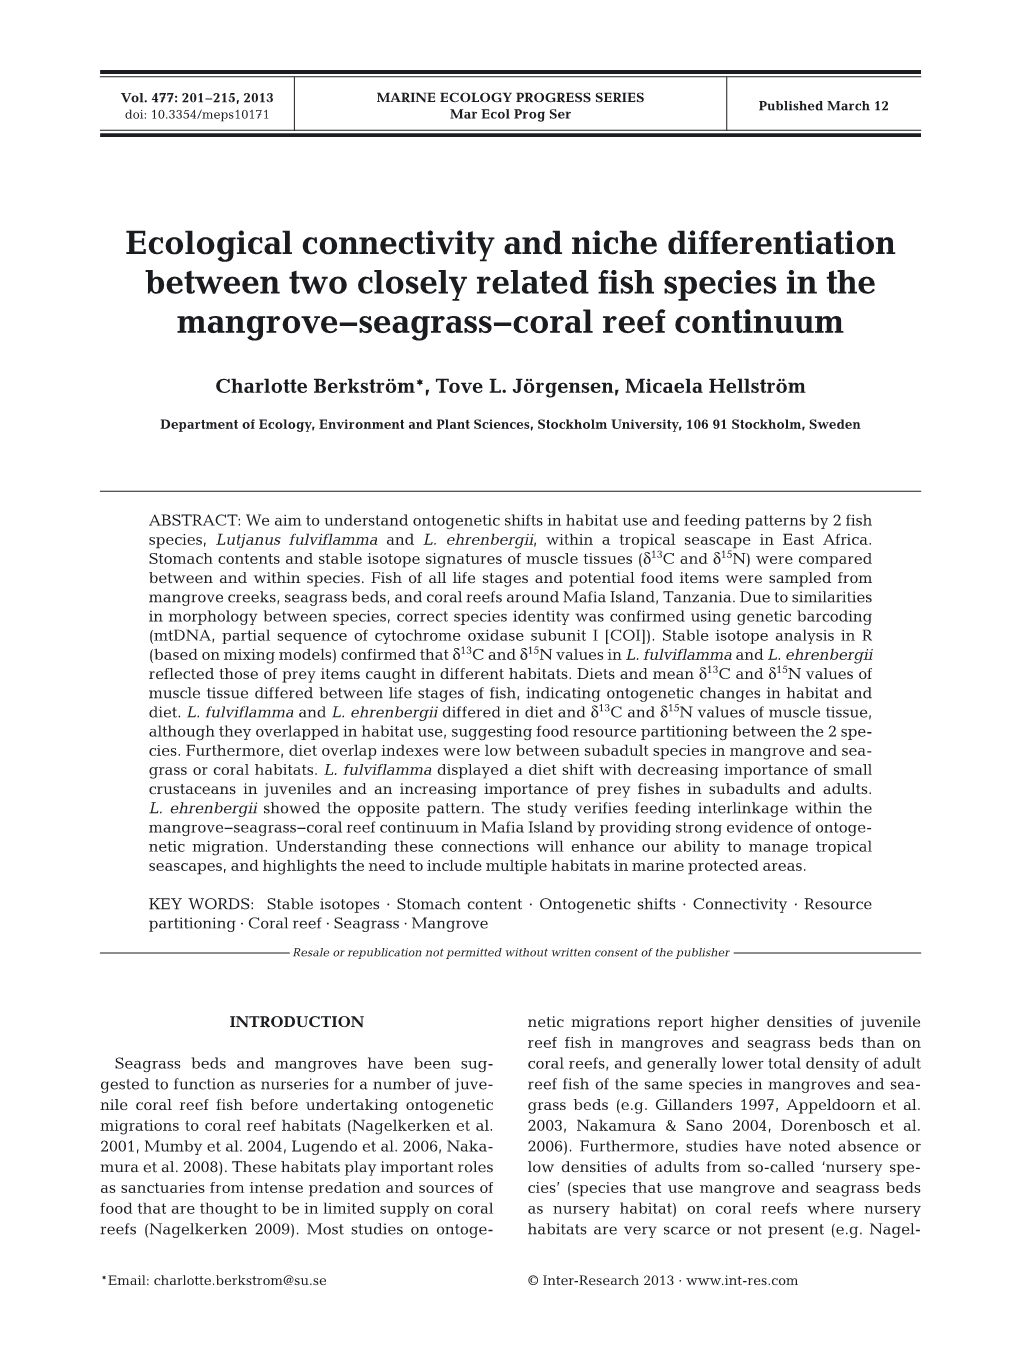 Ecological Connectivity and Niche Differentiation Between Two Closely Related Fish Species in the Mangrove−Seagrass−Coral Reef Continuum